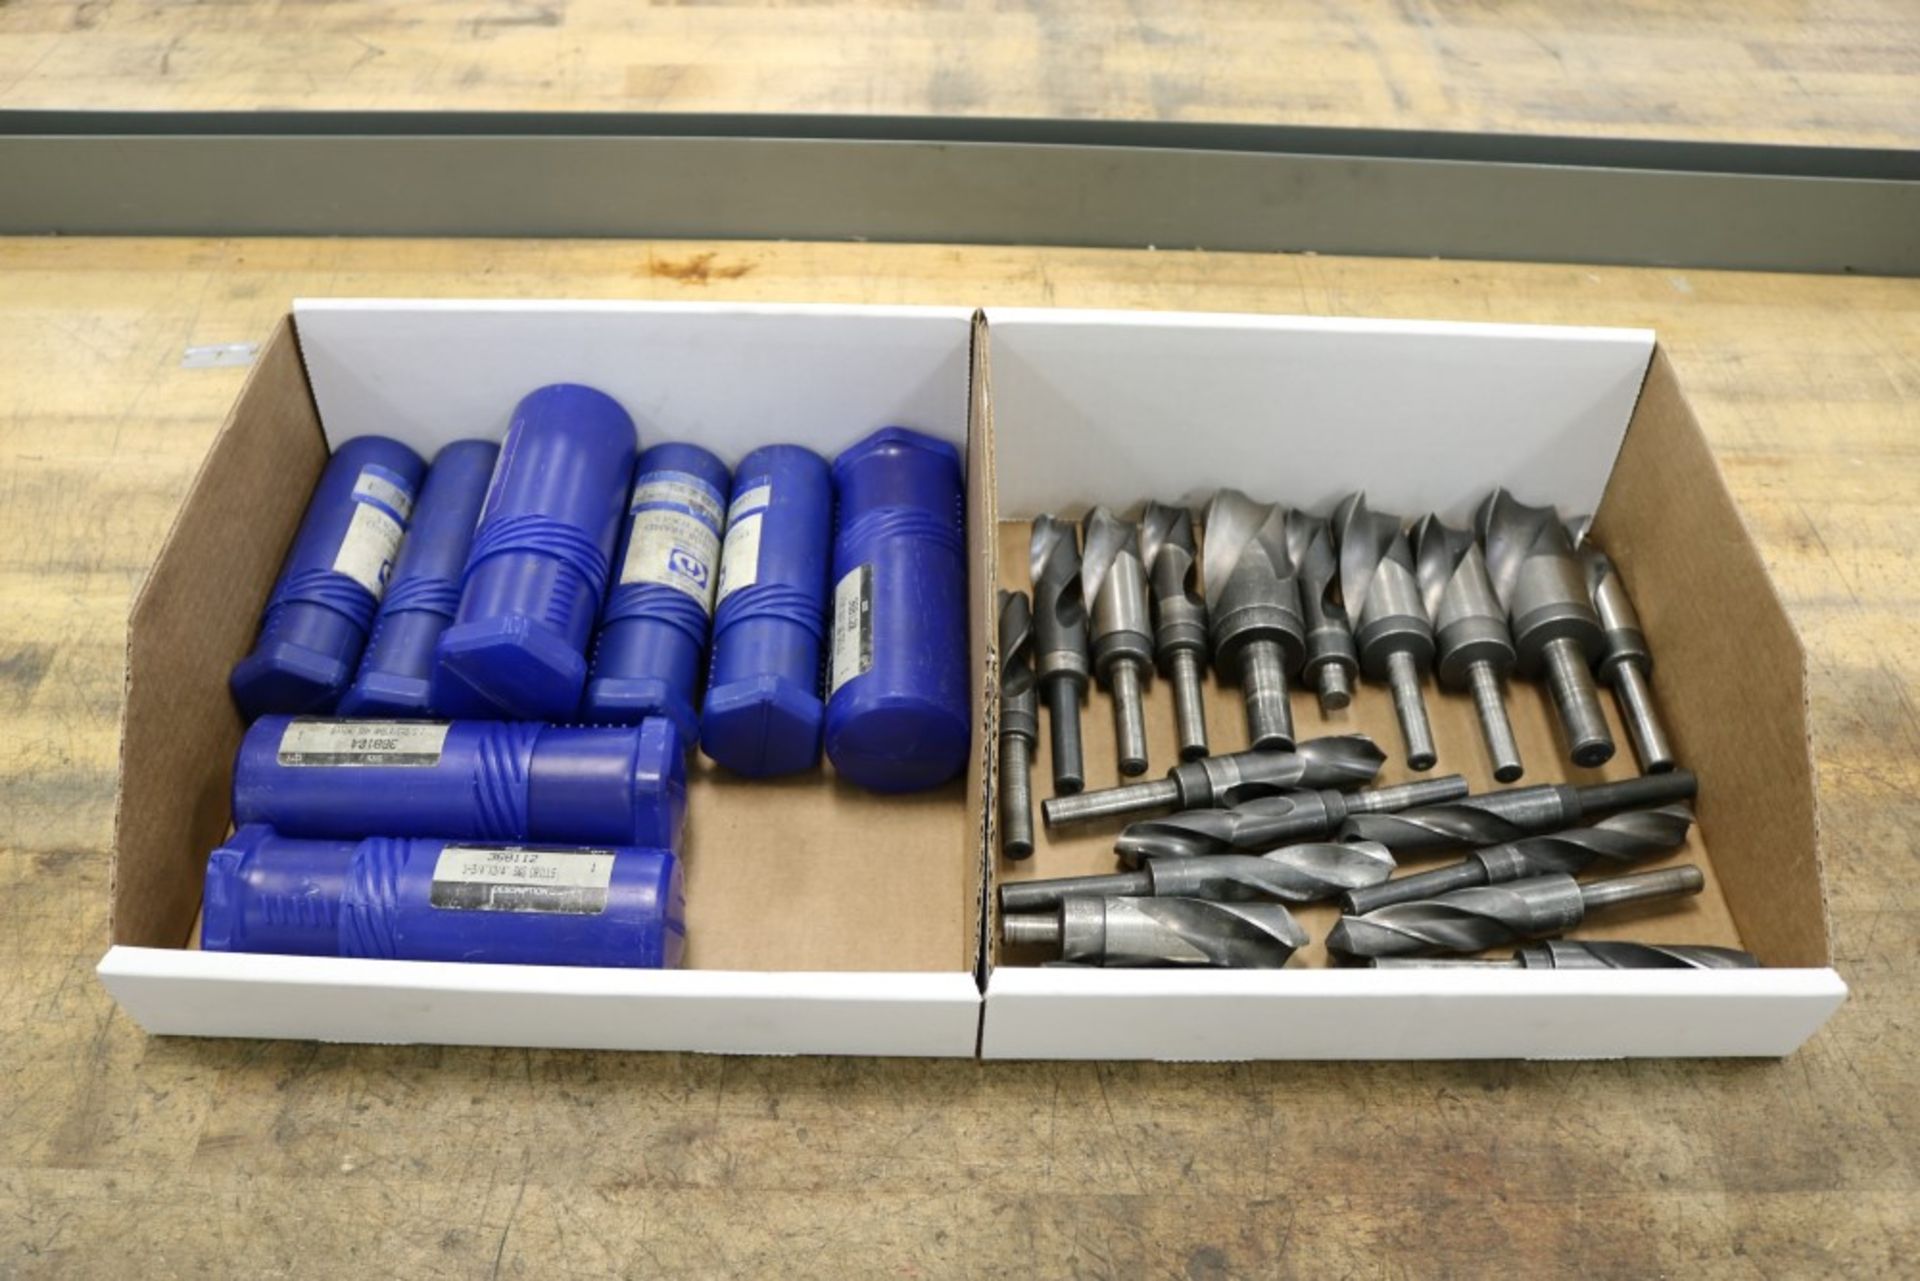 Drills - Various Box of Large Drill Bits 3/4" to 2-3/4" - Image 3 of 6